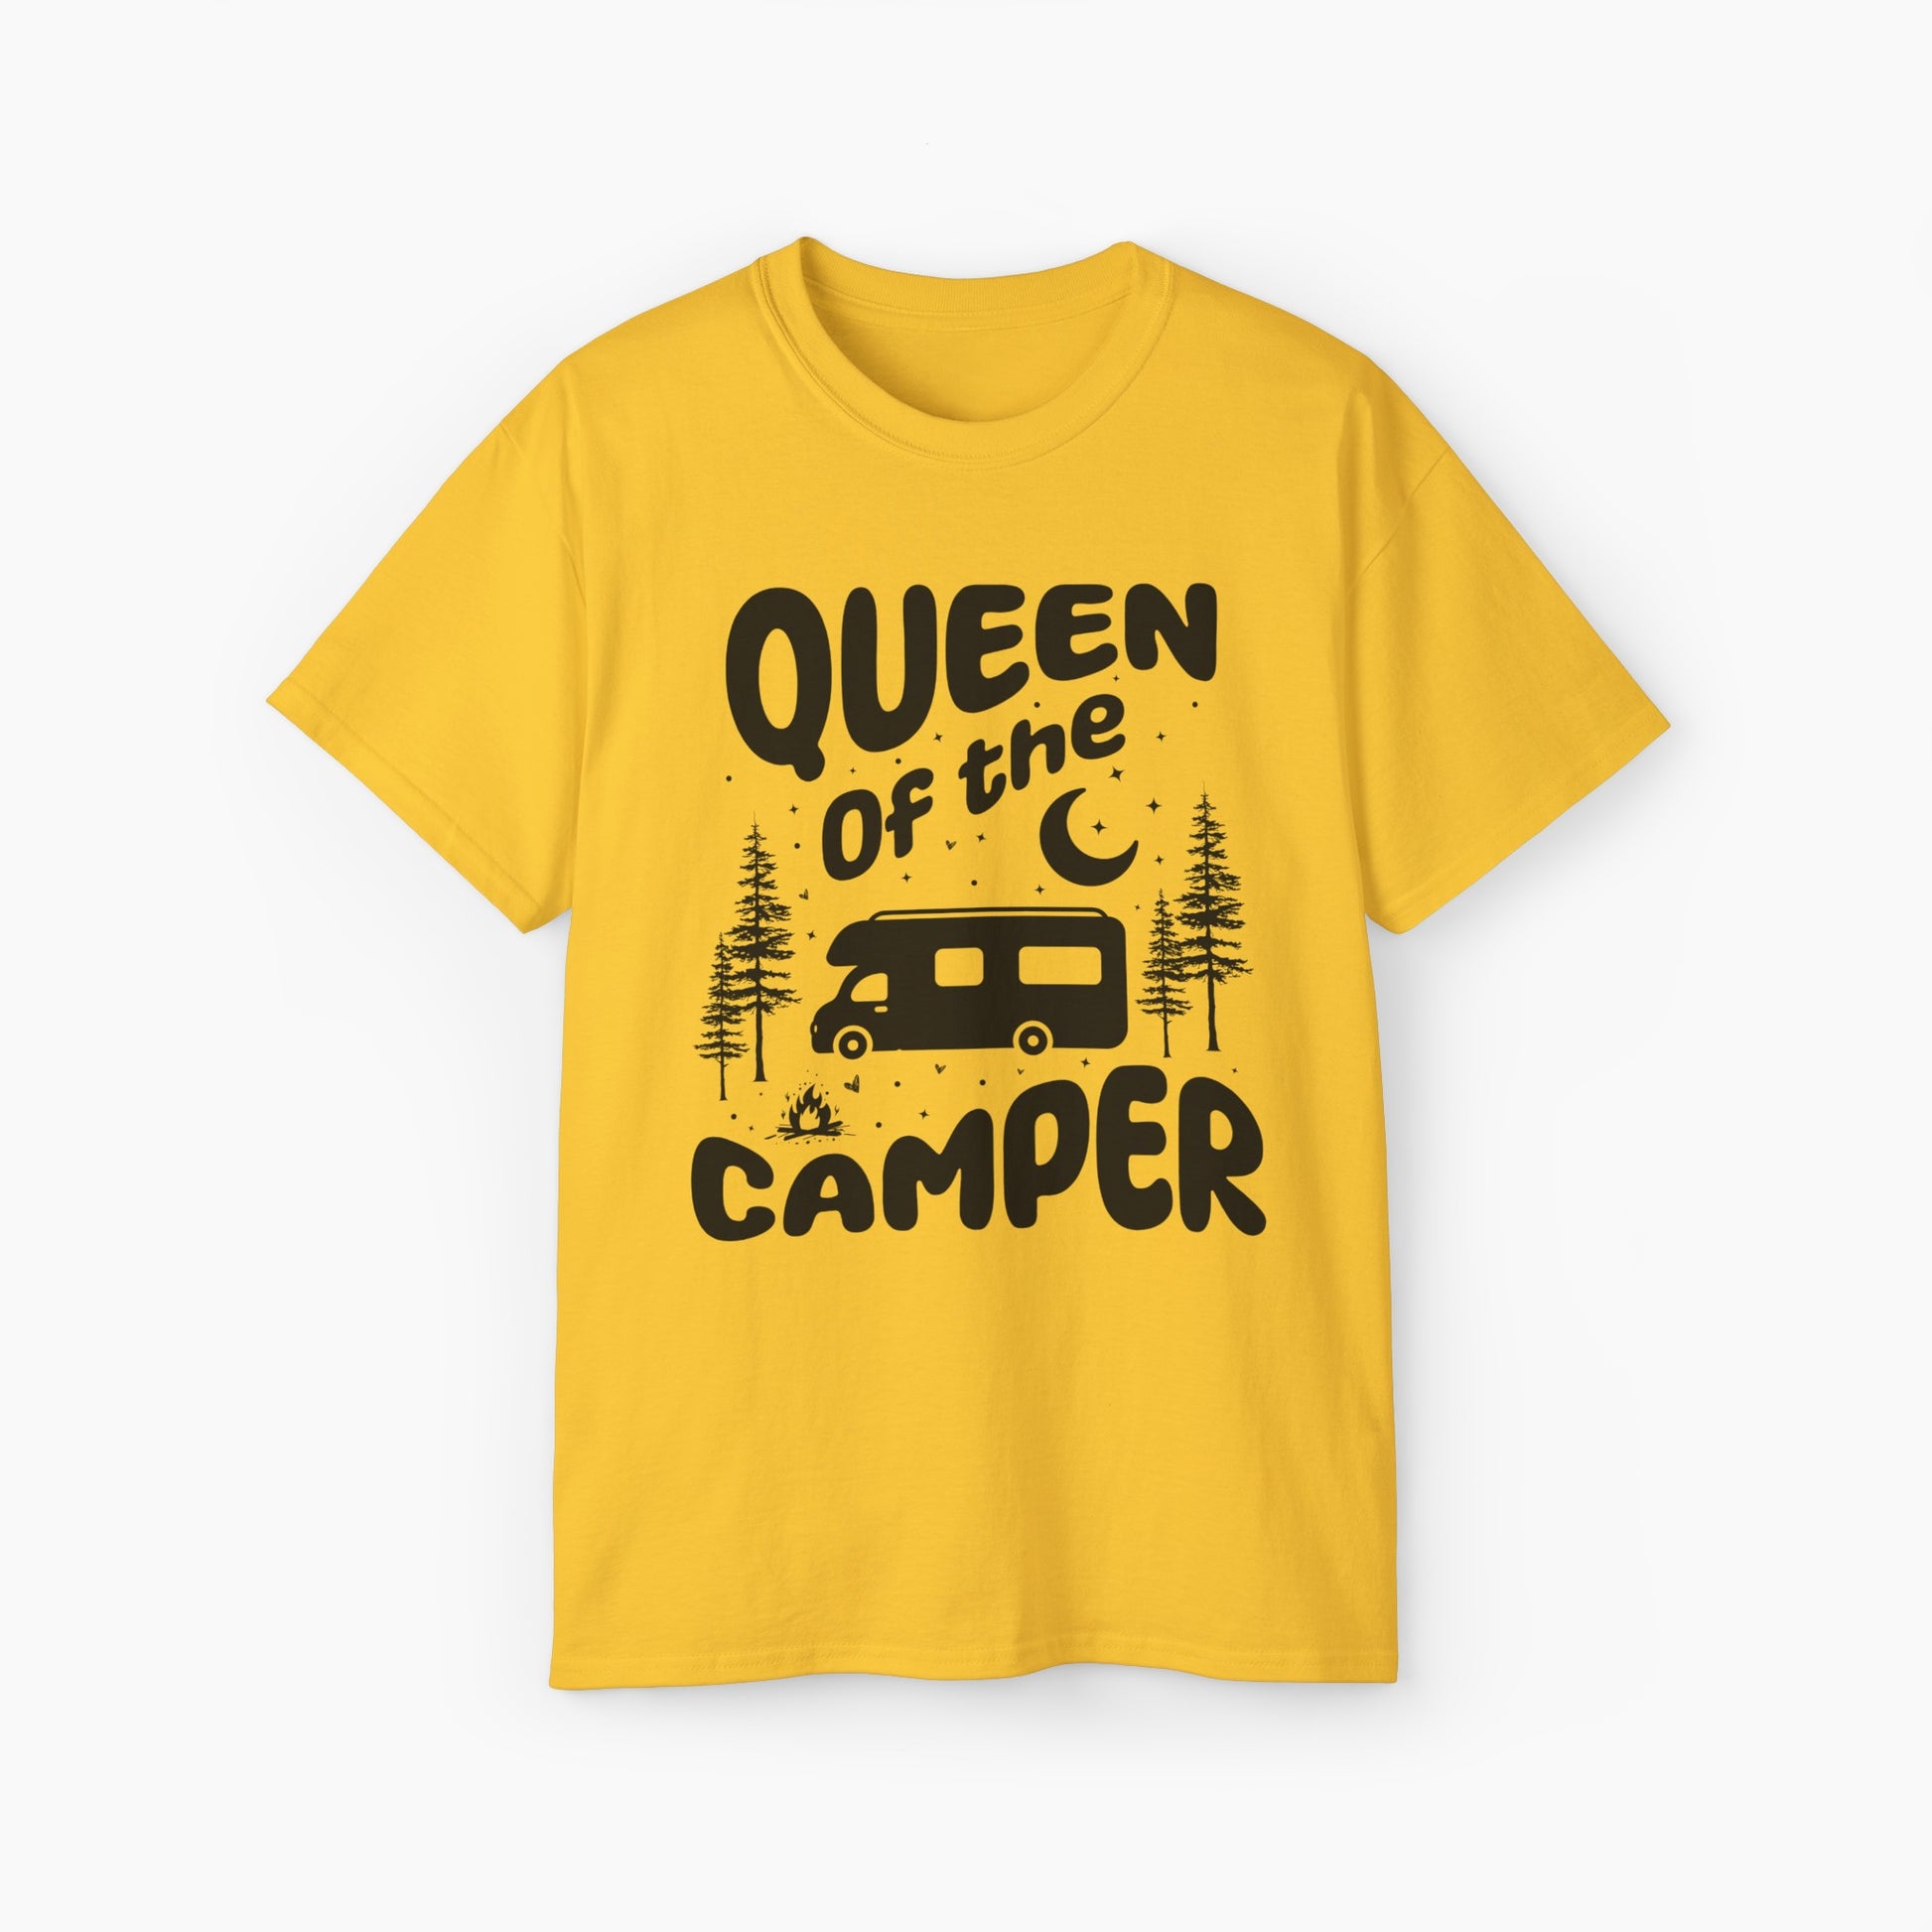 Yellow t-shirt with 'Camping Queen' text, illustrated with a camping van, stars, trees, campfire, and moon, on a plain background.